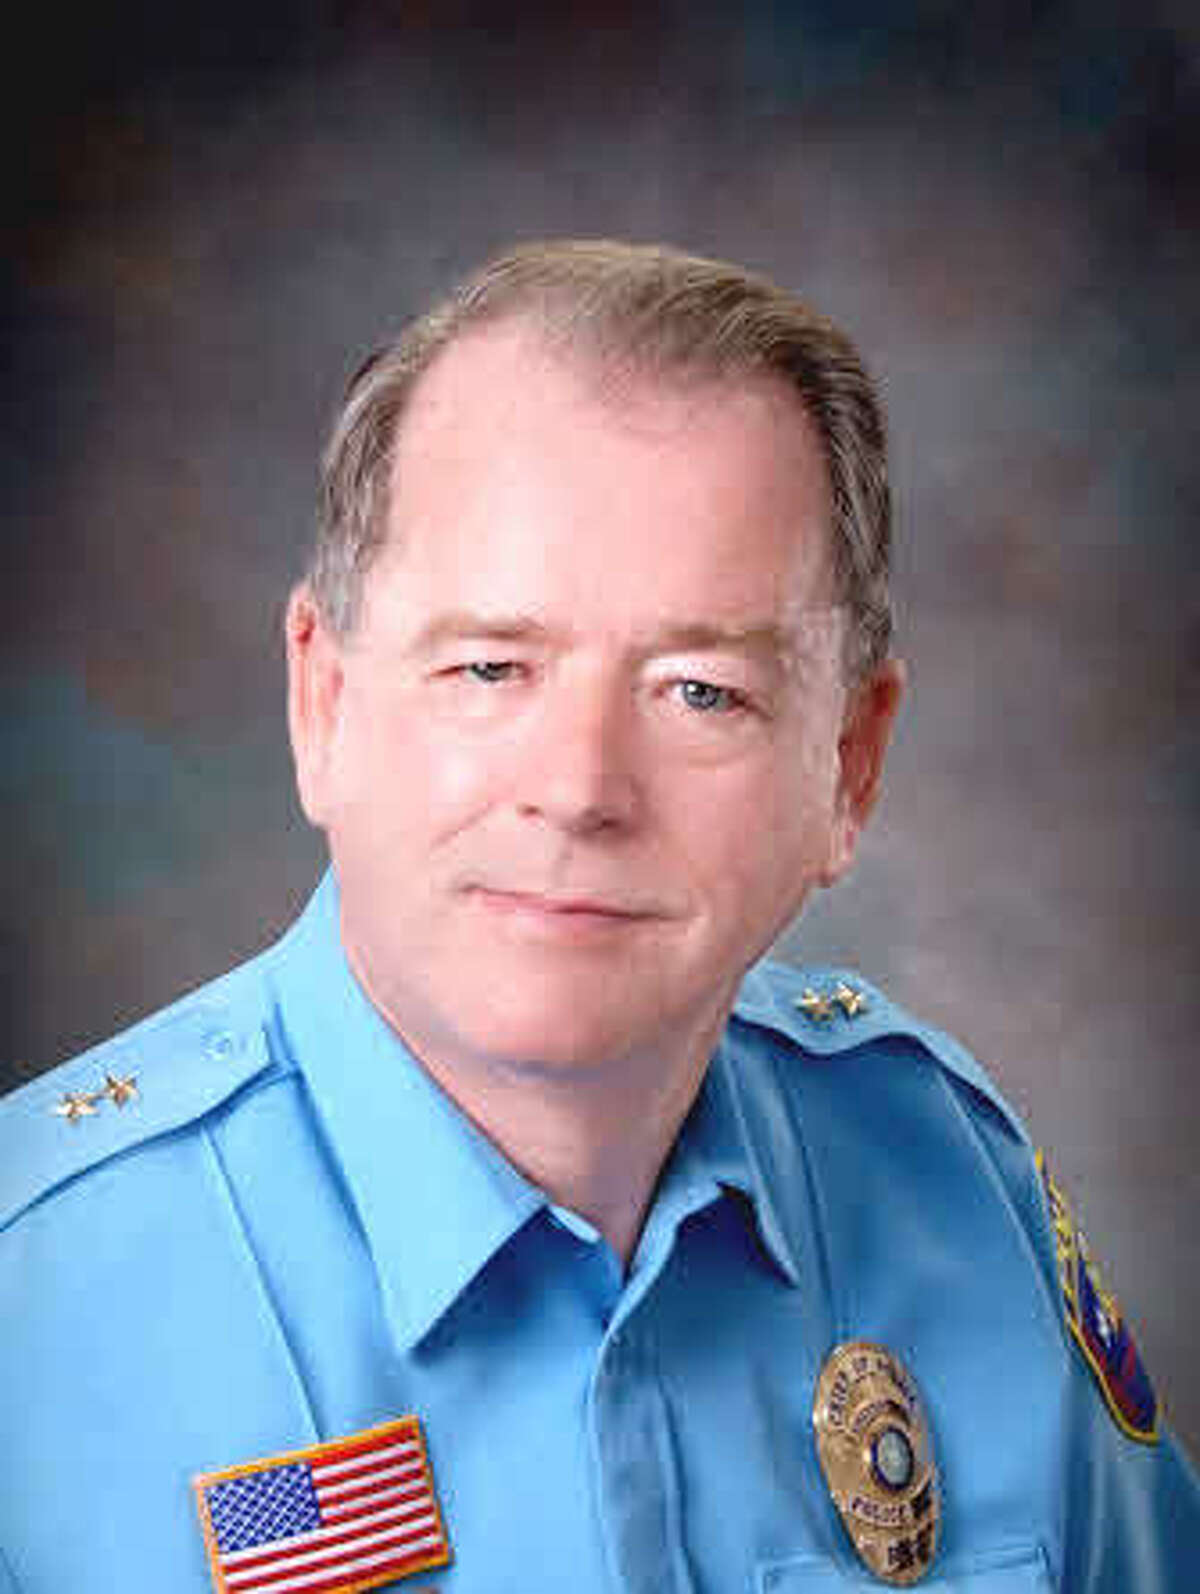 Ray Garner was to become UISD's Director of Law Enforcement Safety/Security.